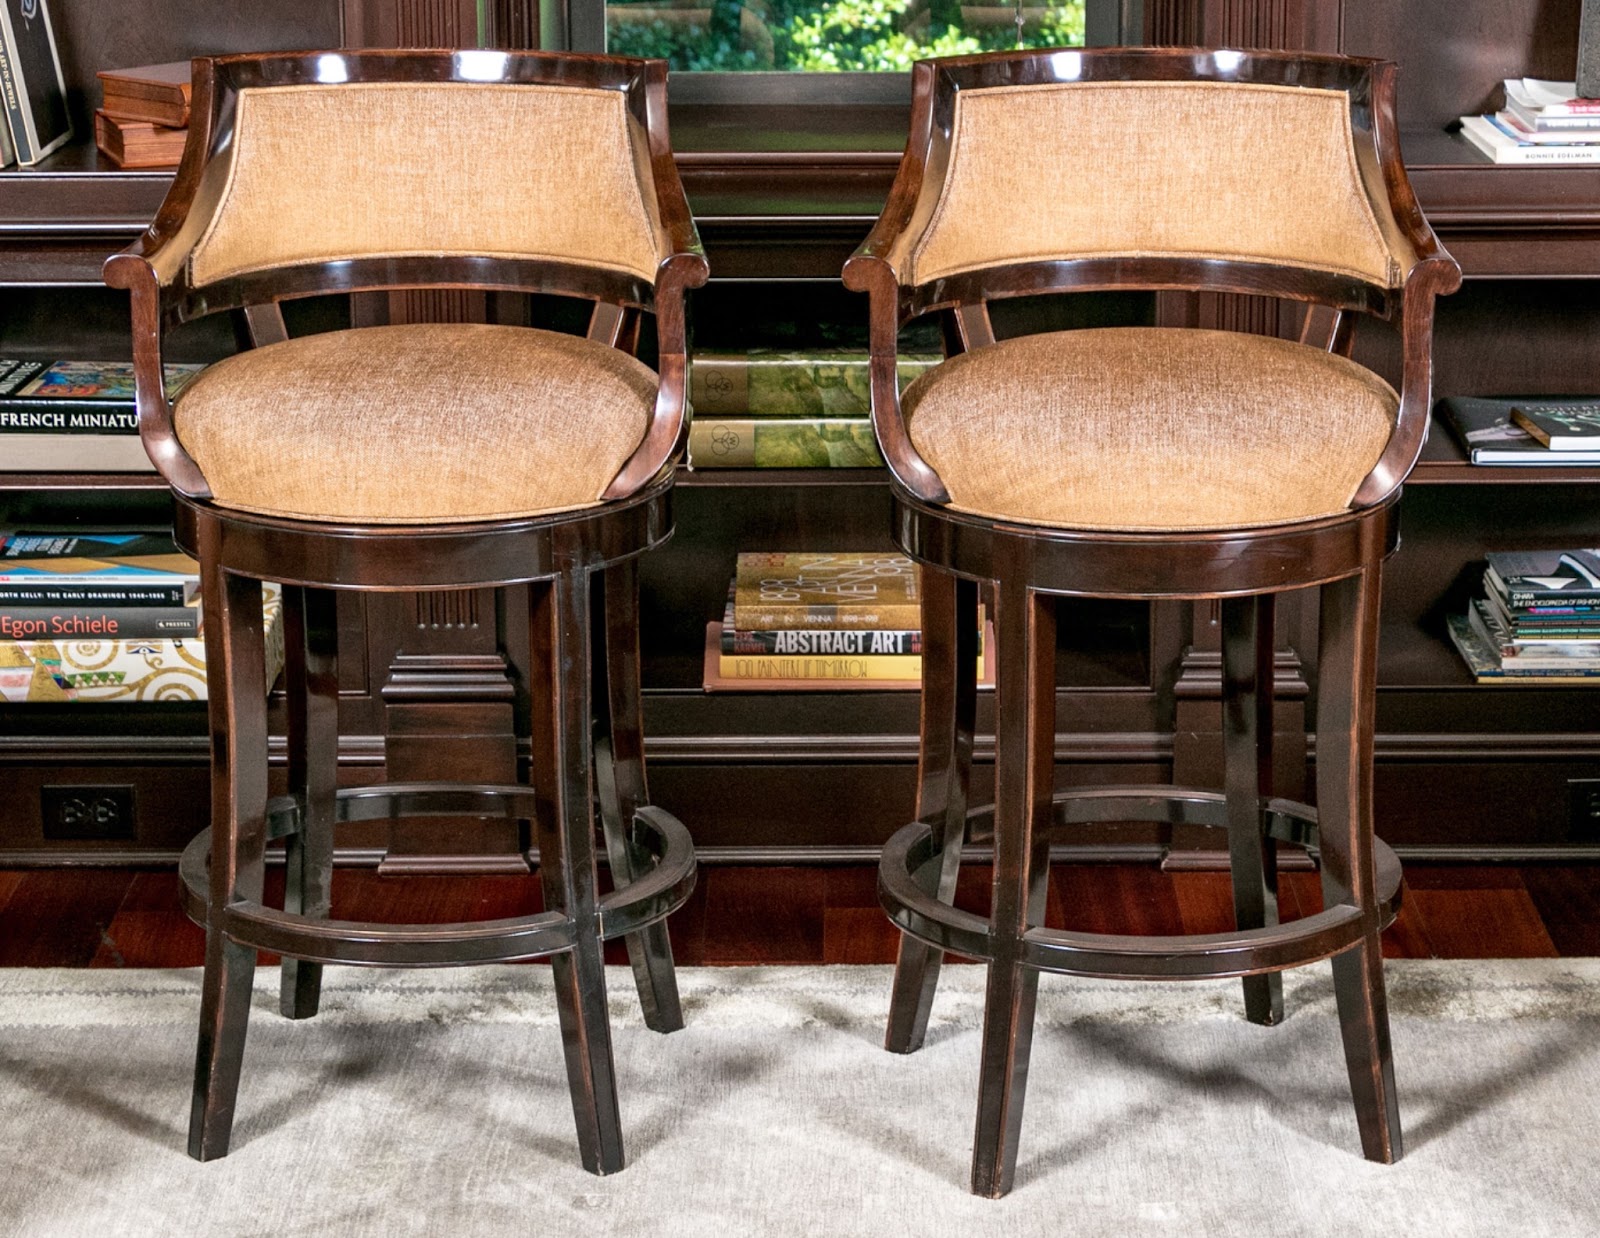 A pair of bar stools with silk chenille upholstery in front of built-in library shelves